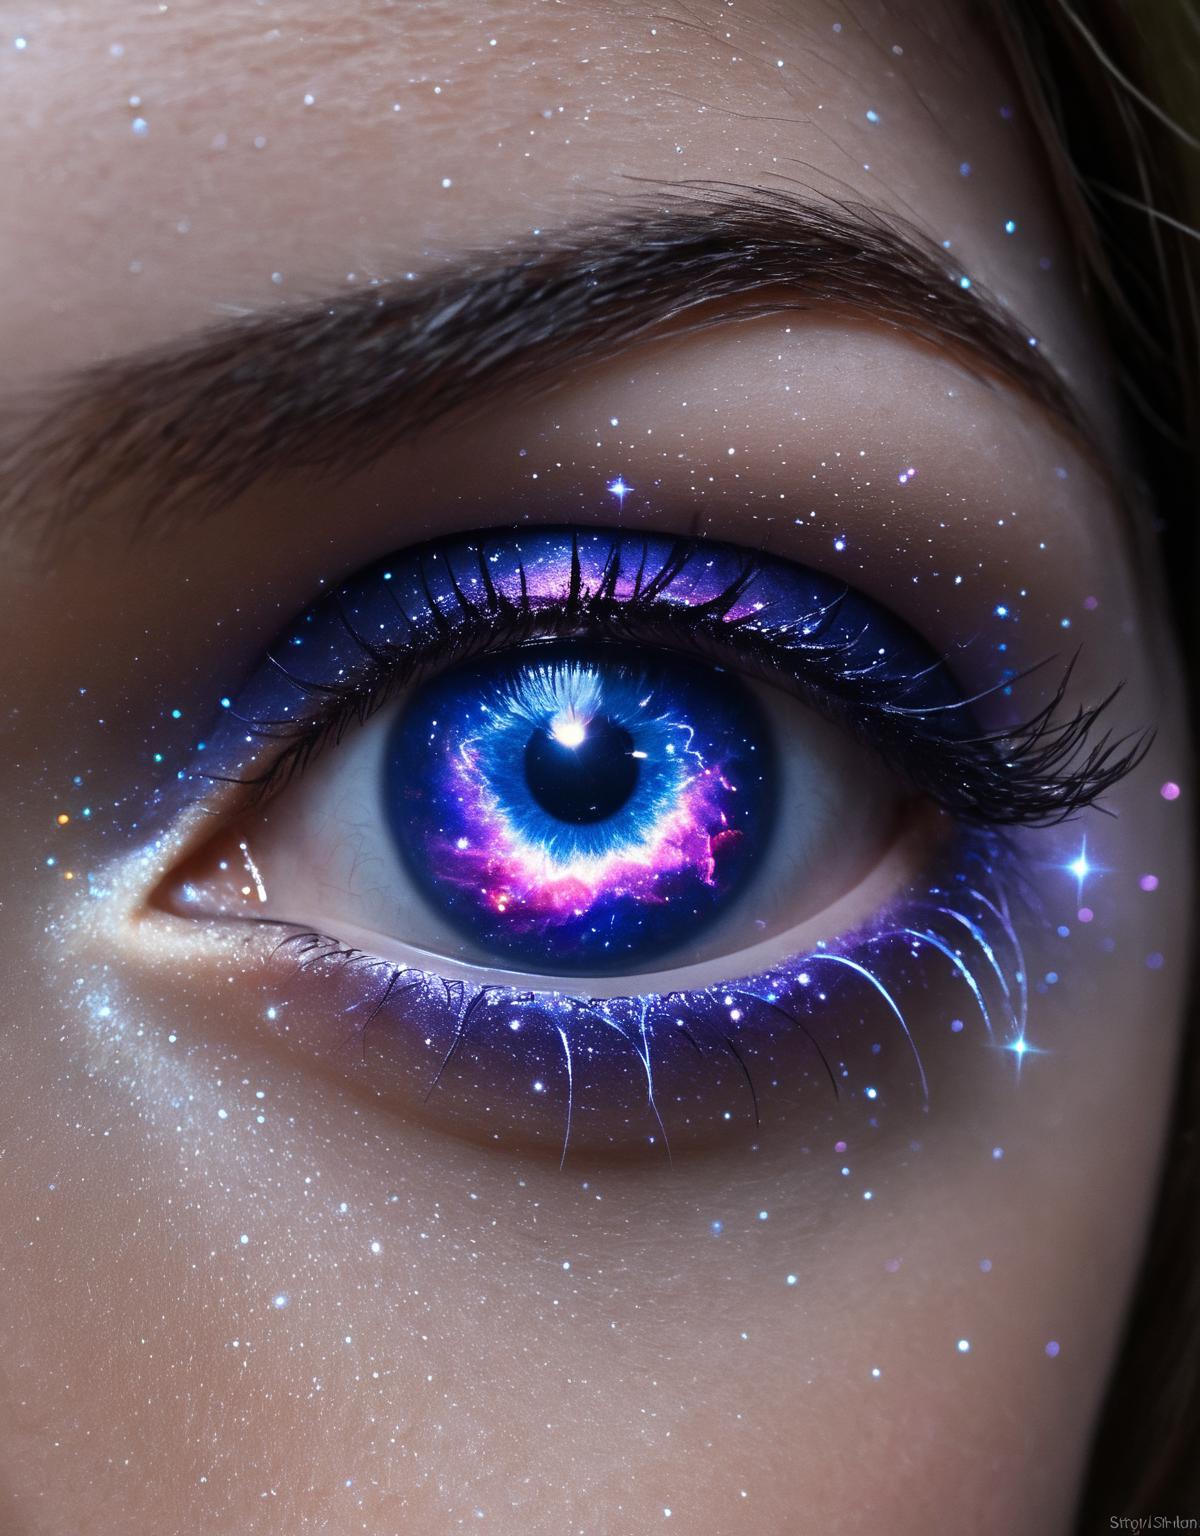 A closeup of a woman's purple eye with stars painted on her eyelid.